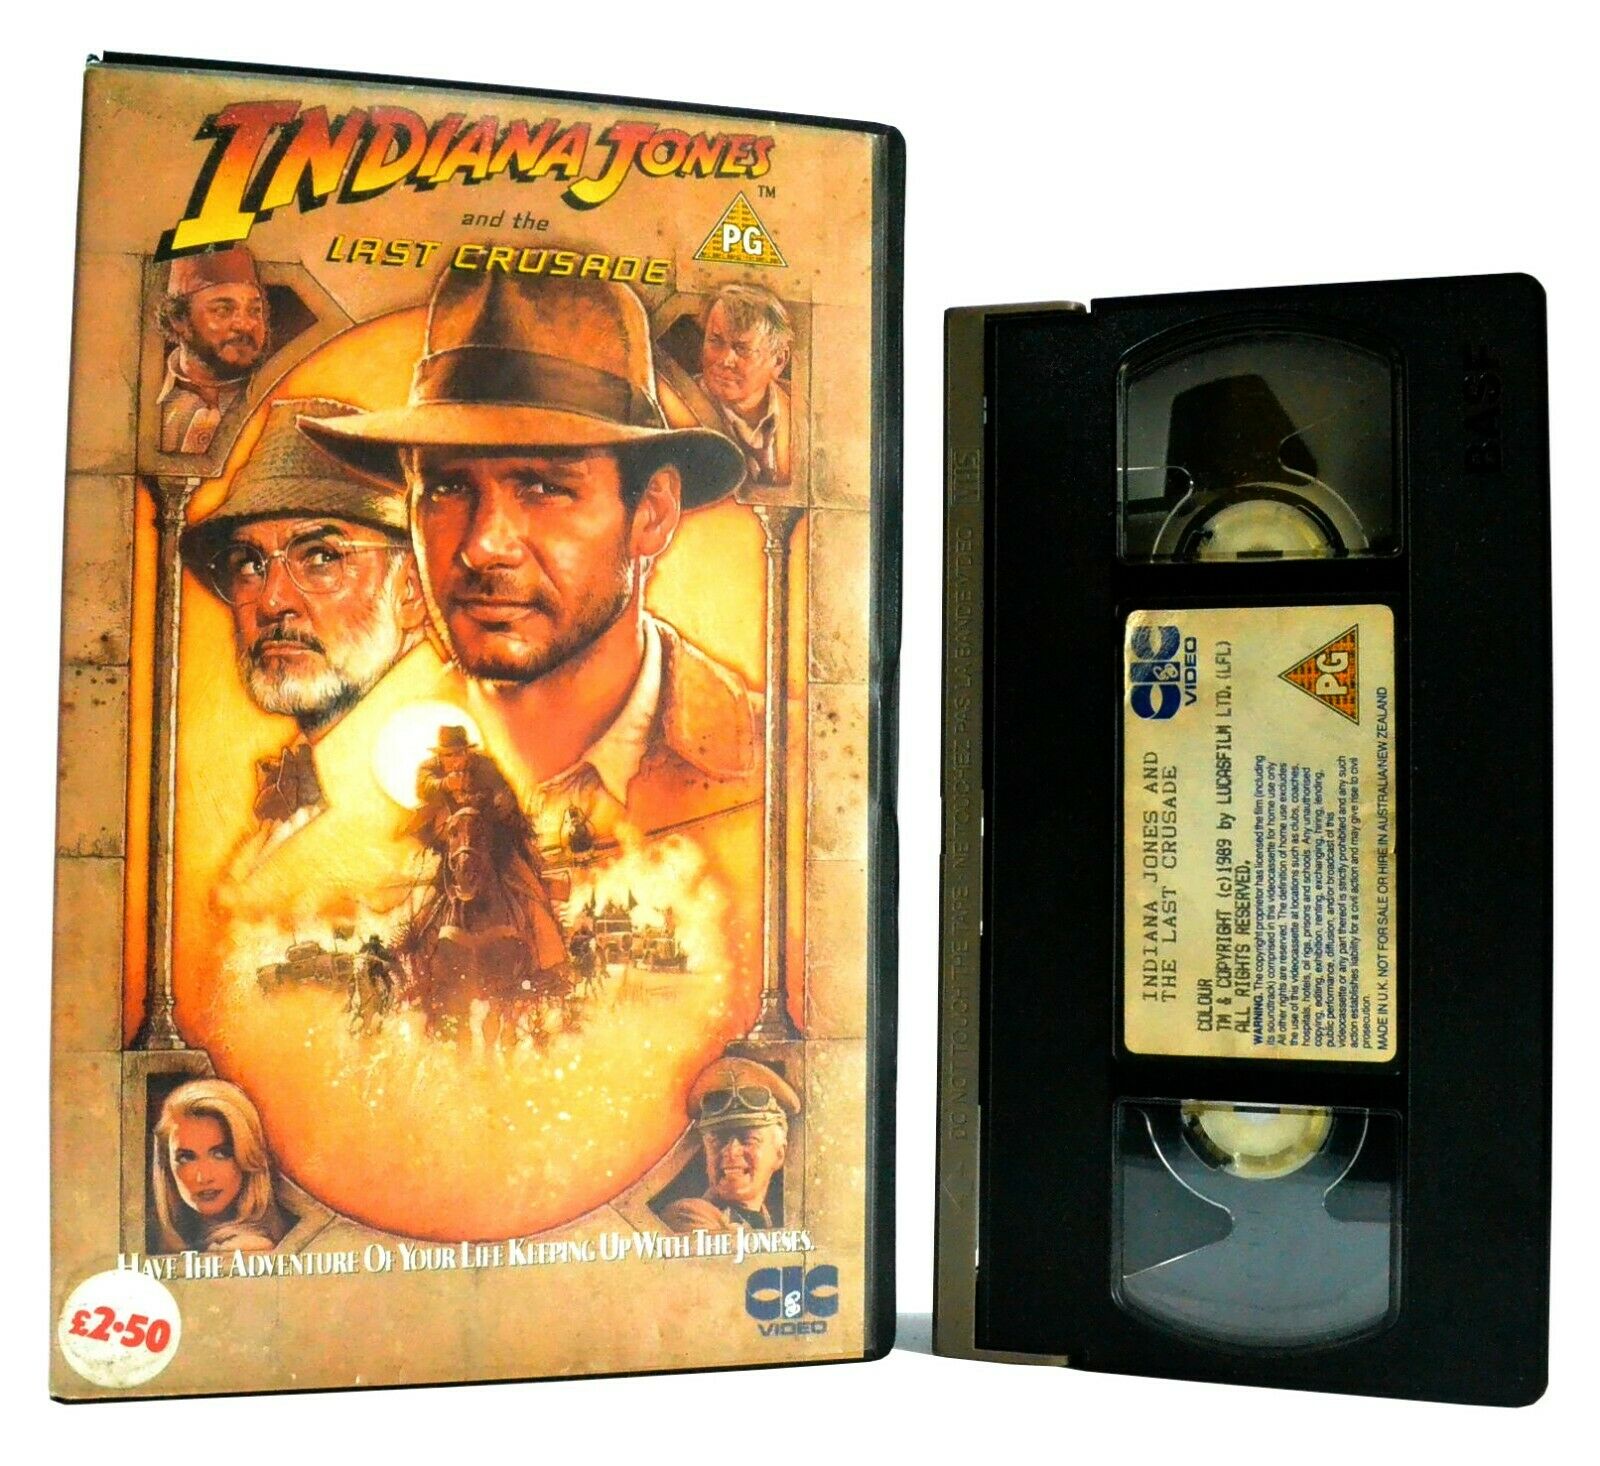 Indiana Jones And The Last Crusade: Action/Adventure (1989) - Large Box - Pal VHS-